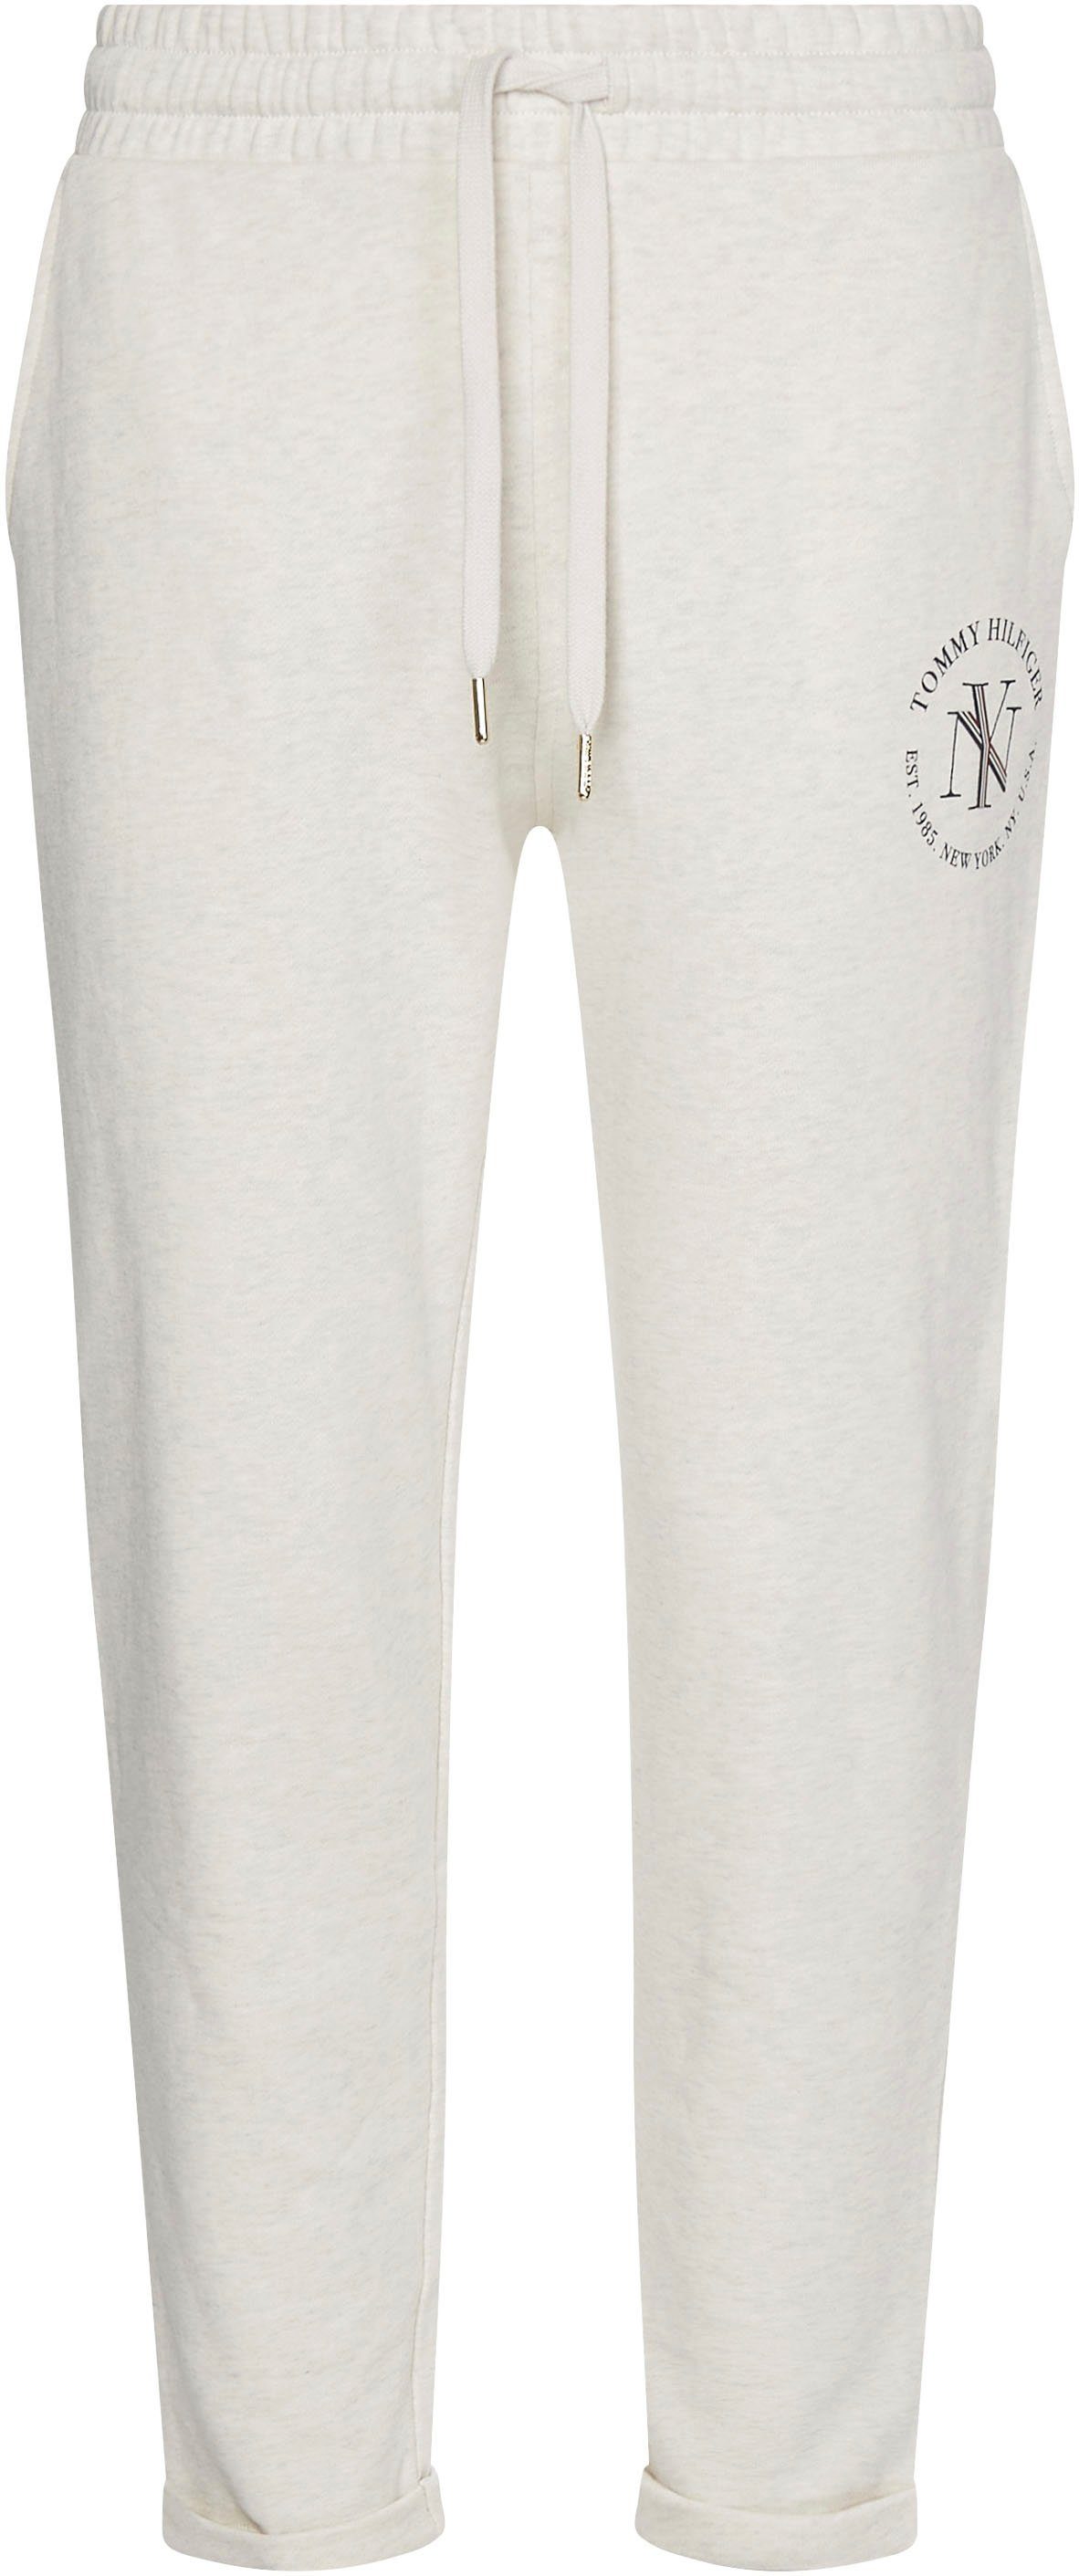 Tommy Hilfiger Sweatpants TAPERED NYC SWEATPANTS Tommy mit Markenlabel White-Heather Hilfiger ROUNDALL